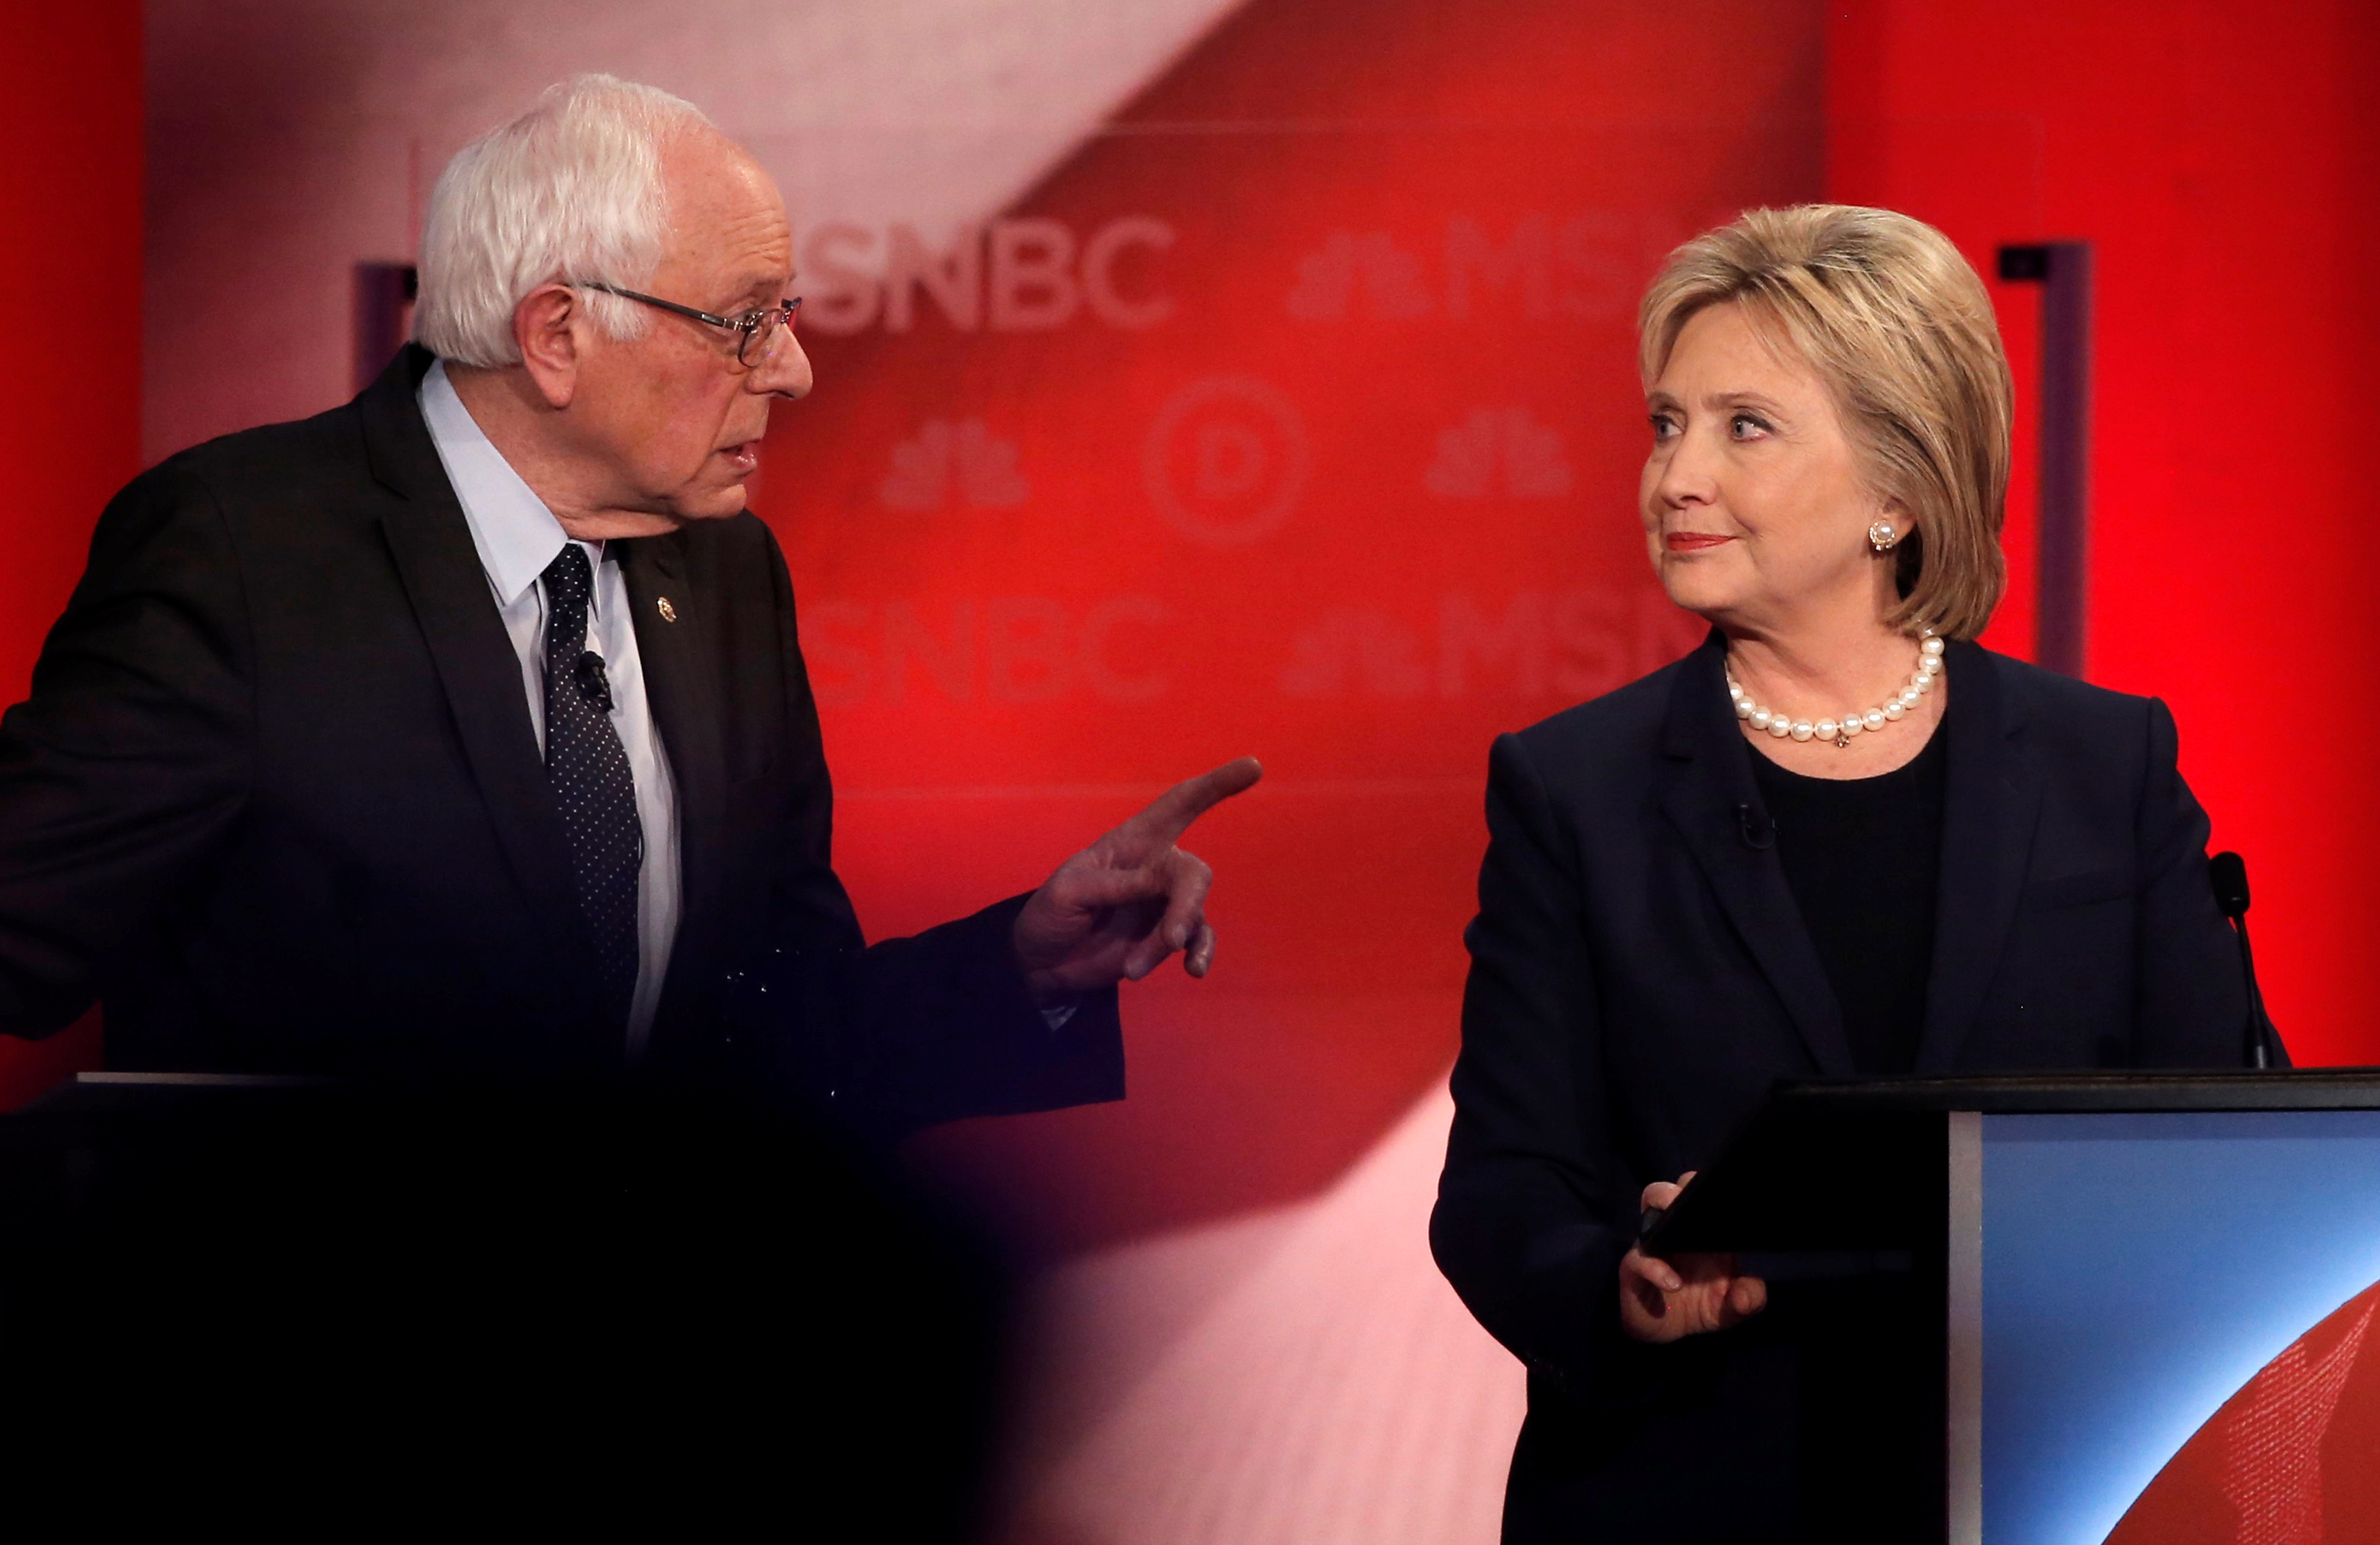 Democratic U.S. presidential candidate Senator Bernie Sanders (L) speaks directly to former Secretary of State Hillary Clinton as they discuss issues during the Democratic presidential candidates debate sponsored by MSNBC at the University of New Hampshire in Durham, New Hampshire, February 4, 2016. REUTERS/Mike Segar